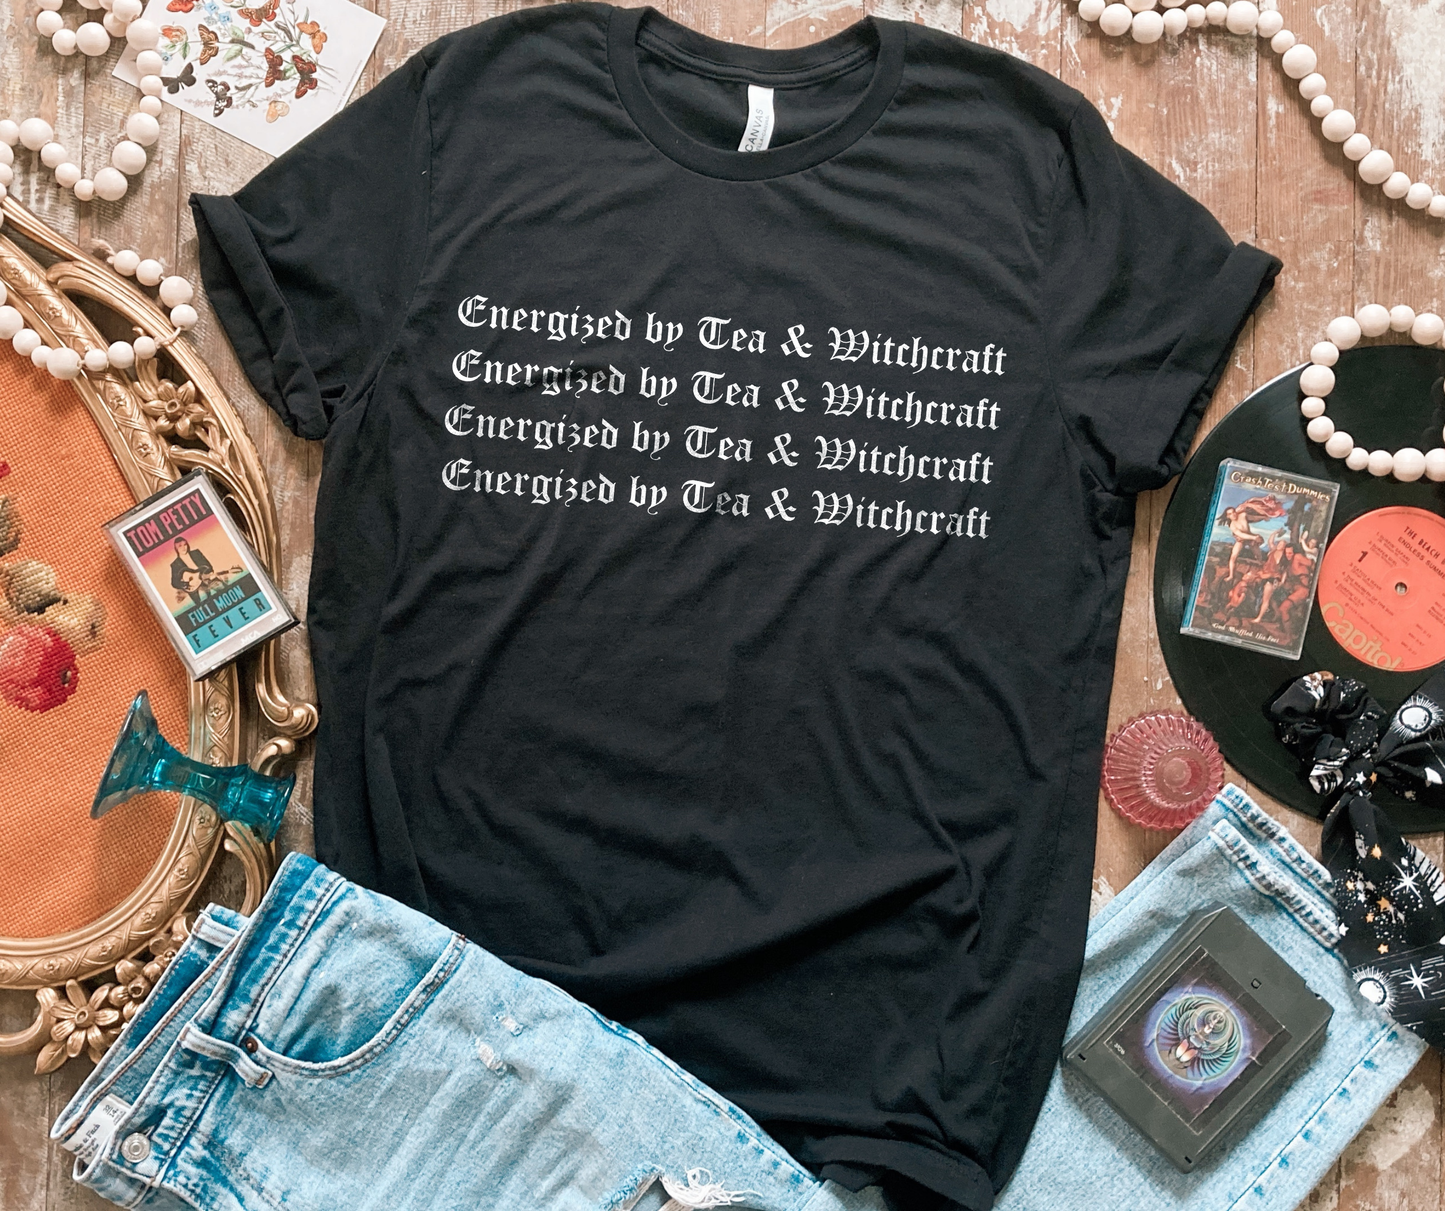 Energized by Tea & Witchcraft T-Shirt